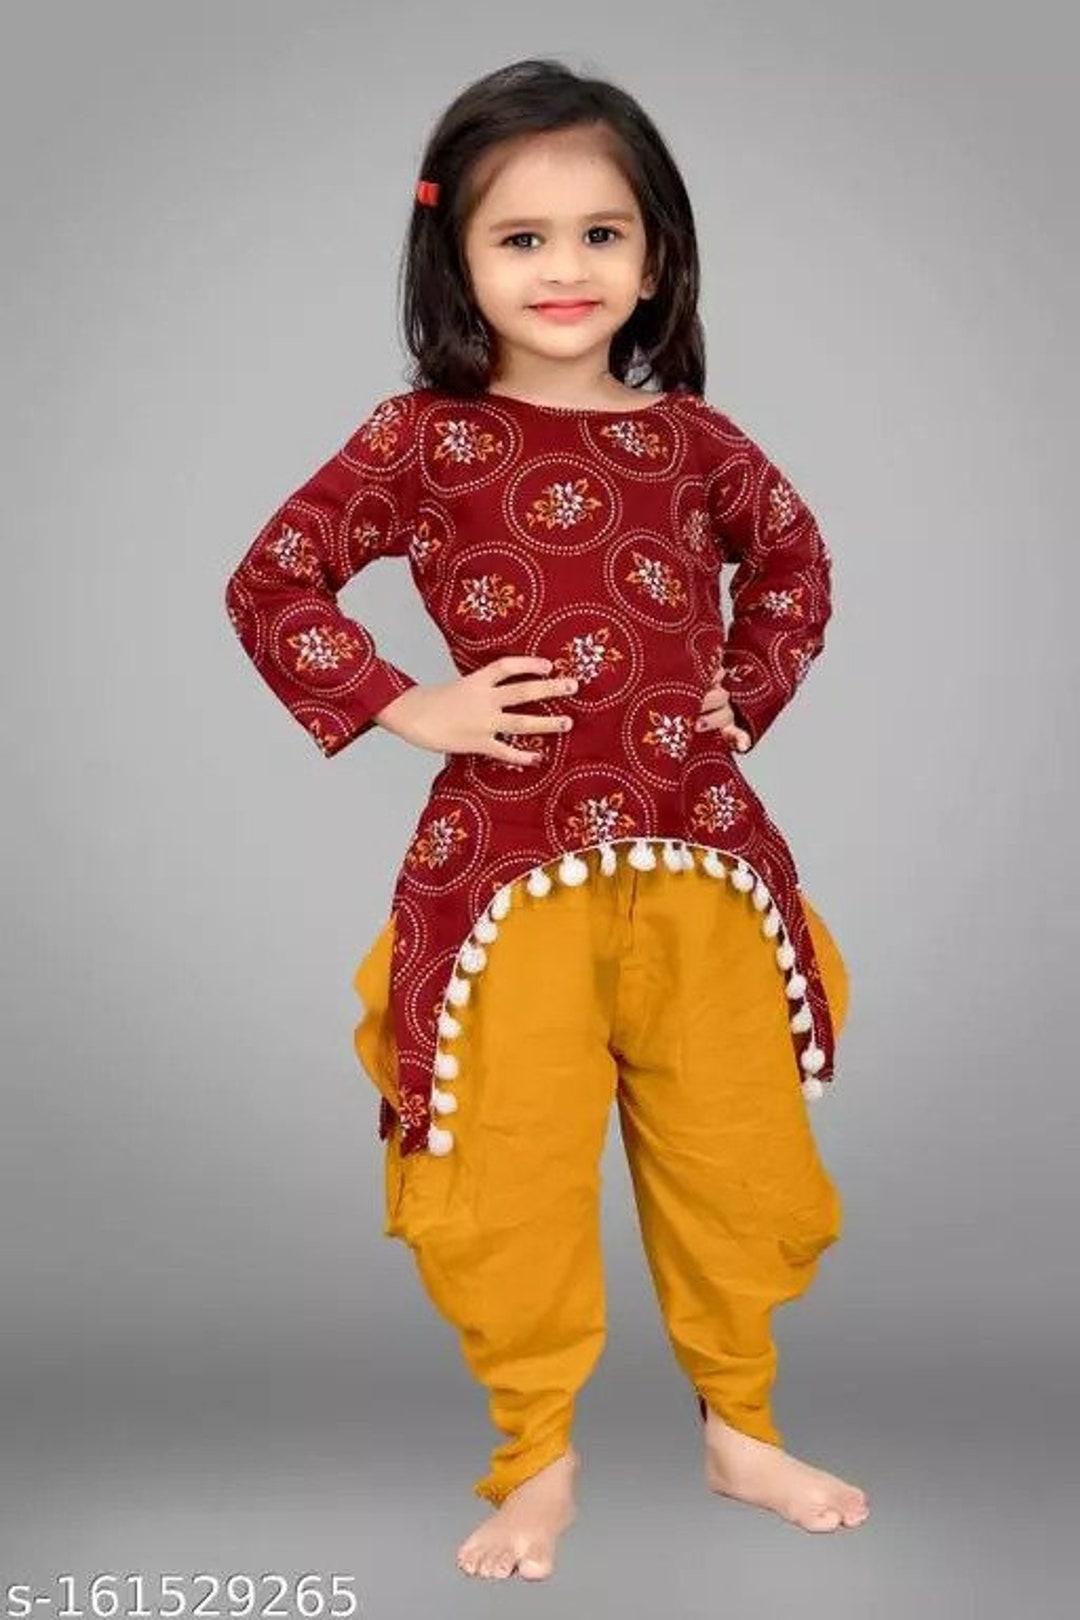 Buy White, Red, white Color Full Sets Ethnic Wear 100% cotton kurti dhoti  indo western ethnic set for baby girls- White Red Clothing for Girl Jollee